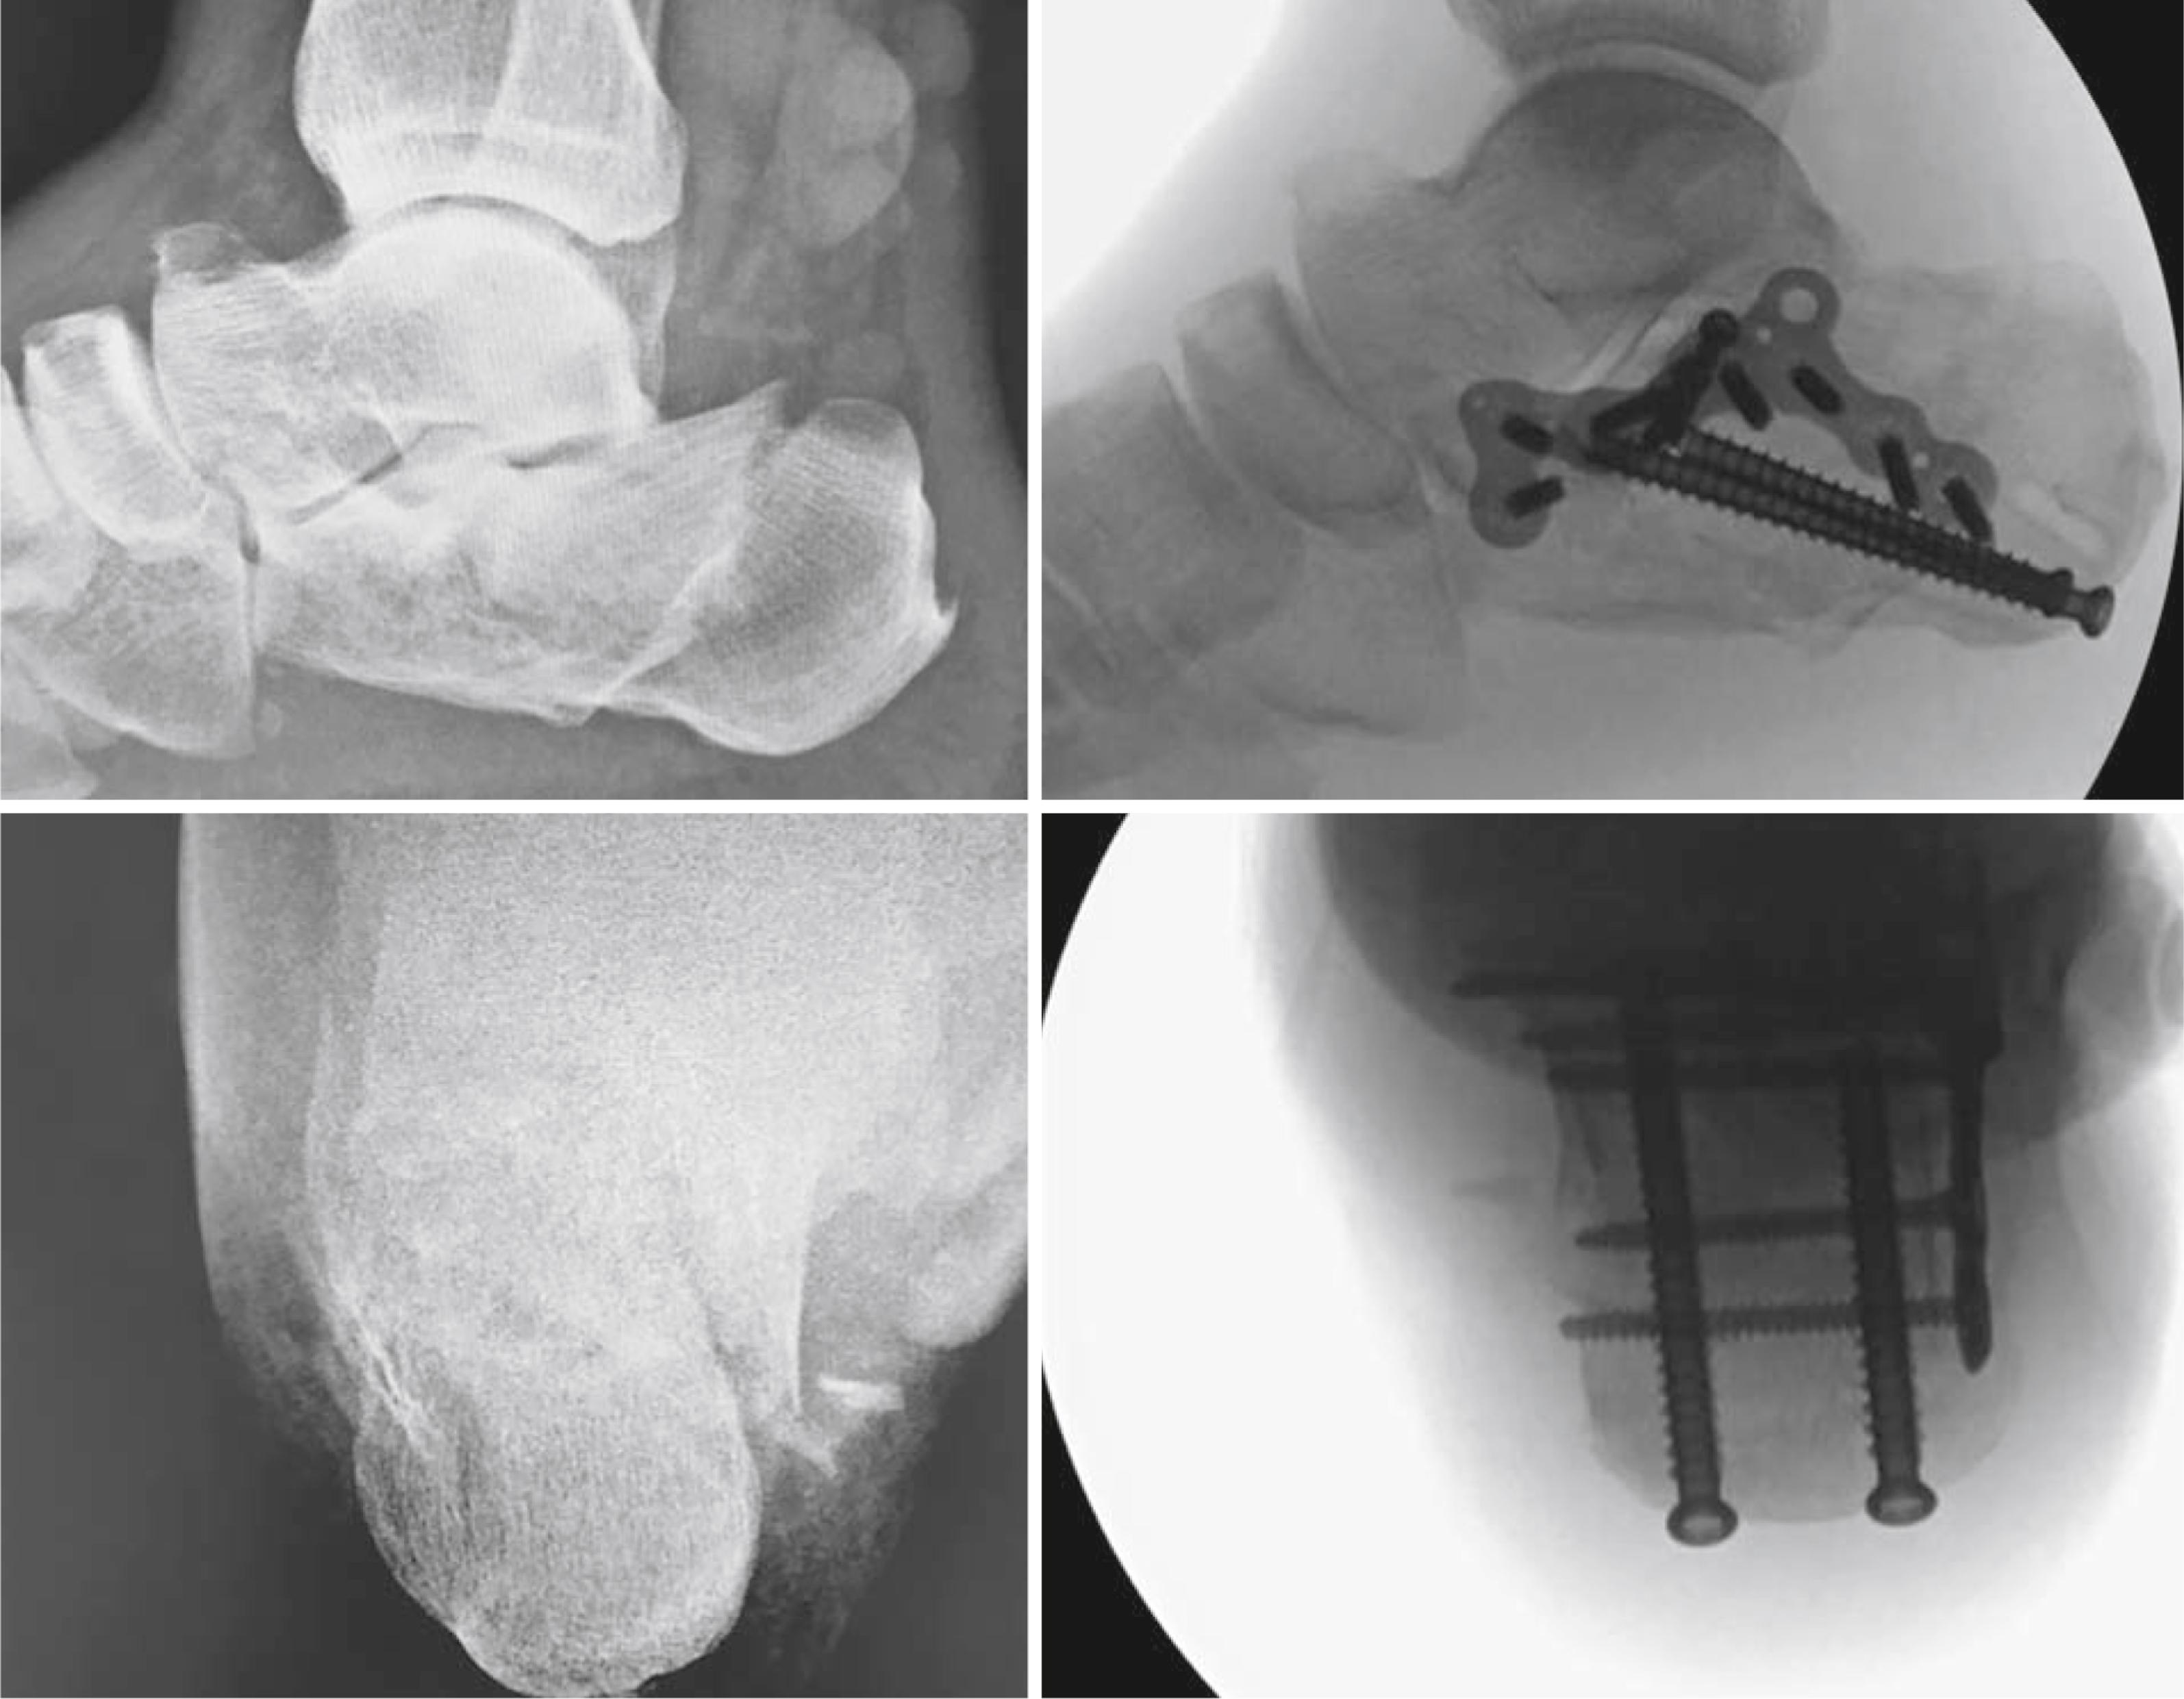 FIGURE 89.14, Lateral plate fixation of calcaneal fracture. SEE TECHNIQUE 89.3.